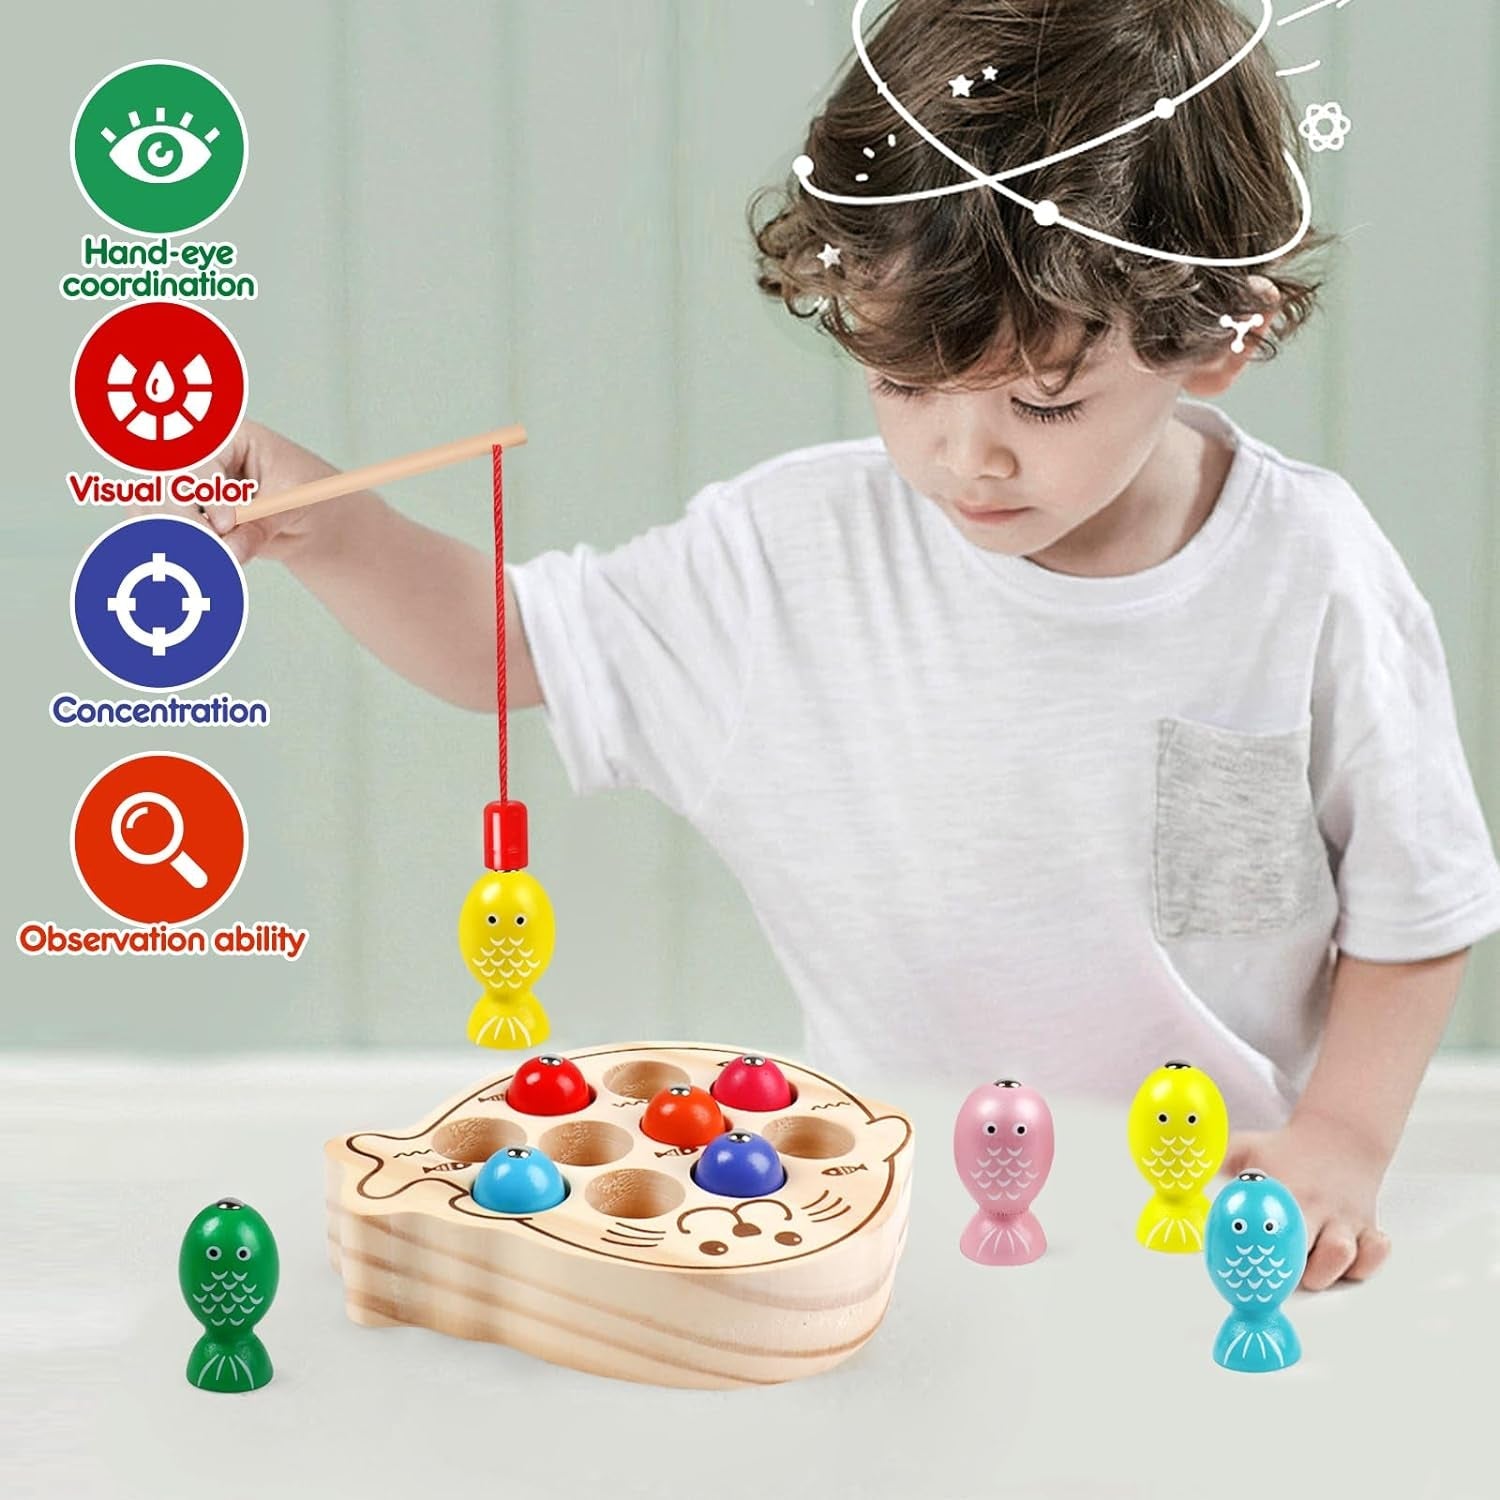 Magnetic Wooden Toys Fishing Game,Toddler Magnetic Fishing Toys Wood Puzzle Montessori Preschool Educational Activities Learning Hand-Eye Coordination Fine Motor Skills Toys for Boys Girls Ages 3+